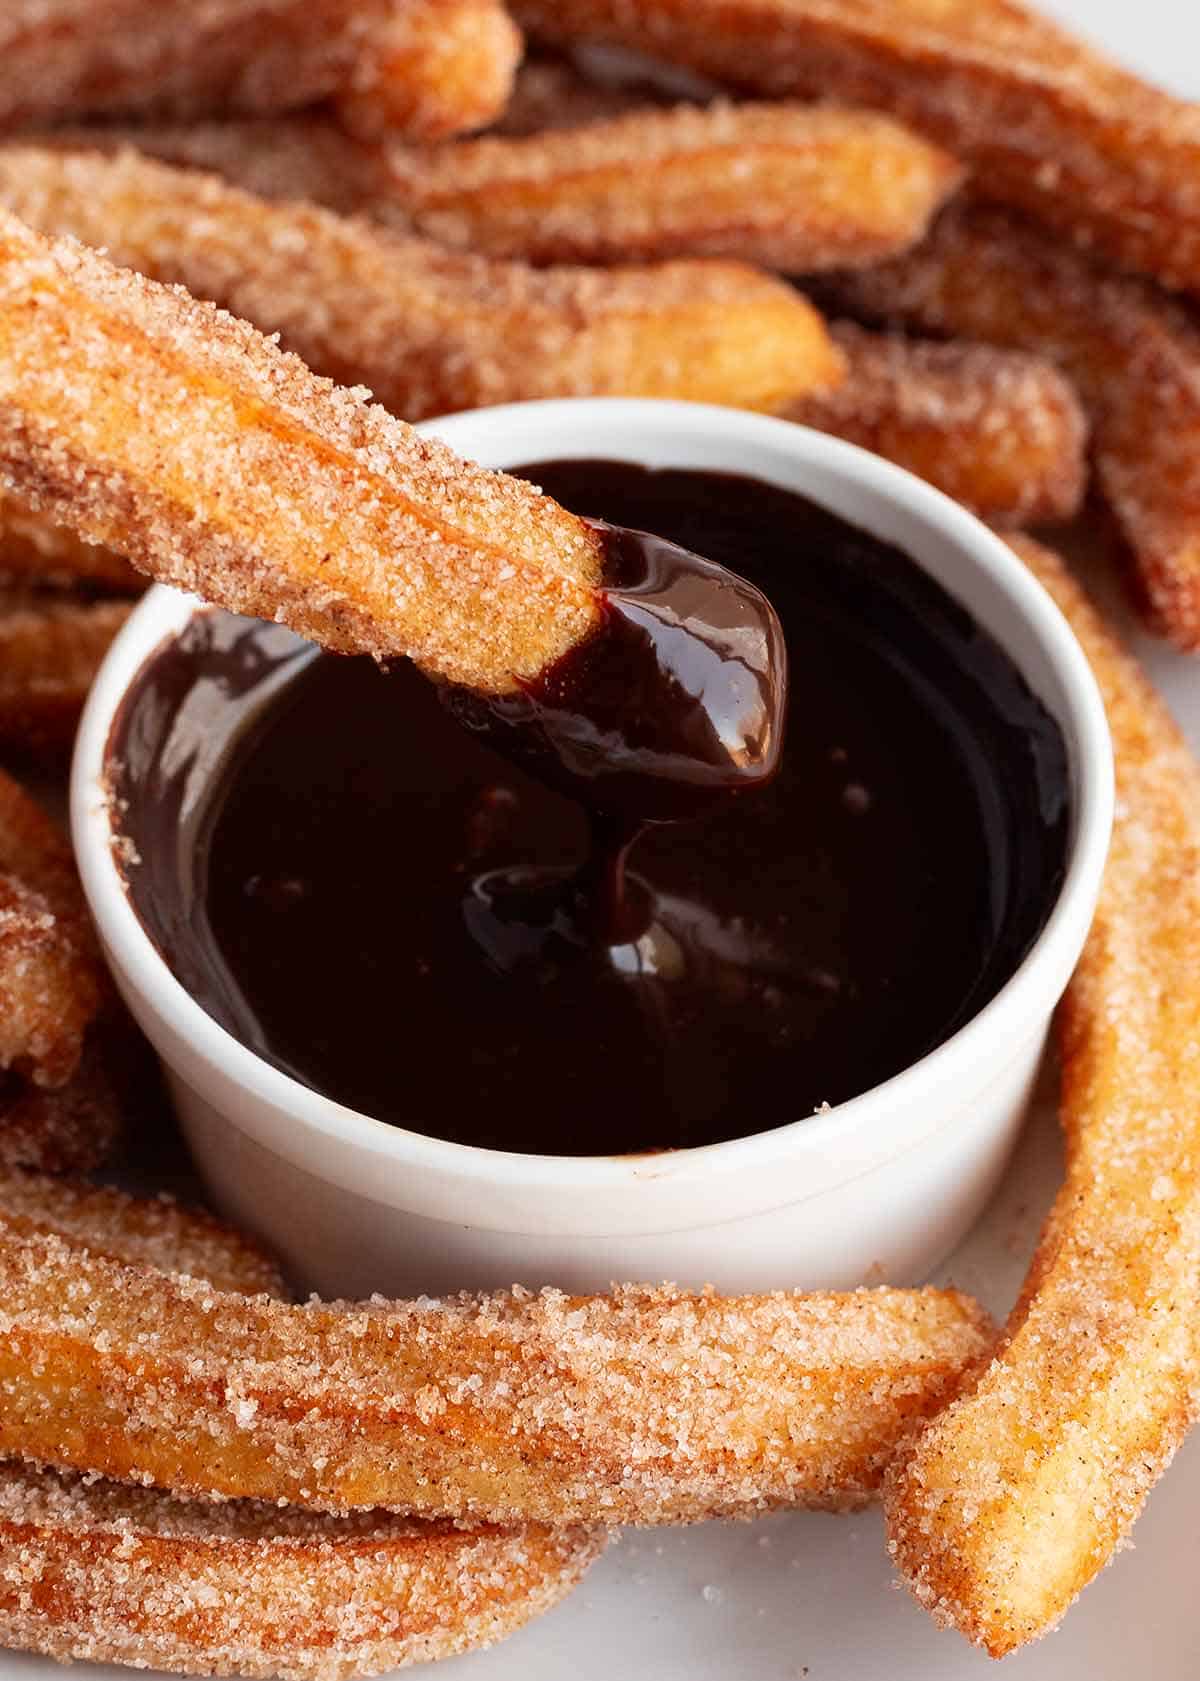 Dipping a churro in chocolate.